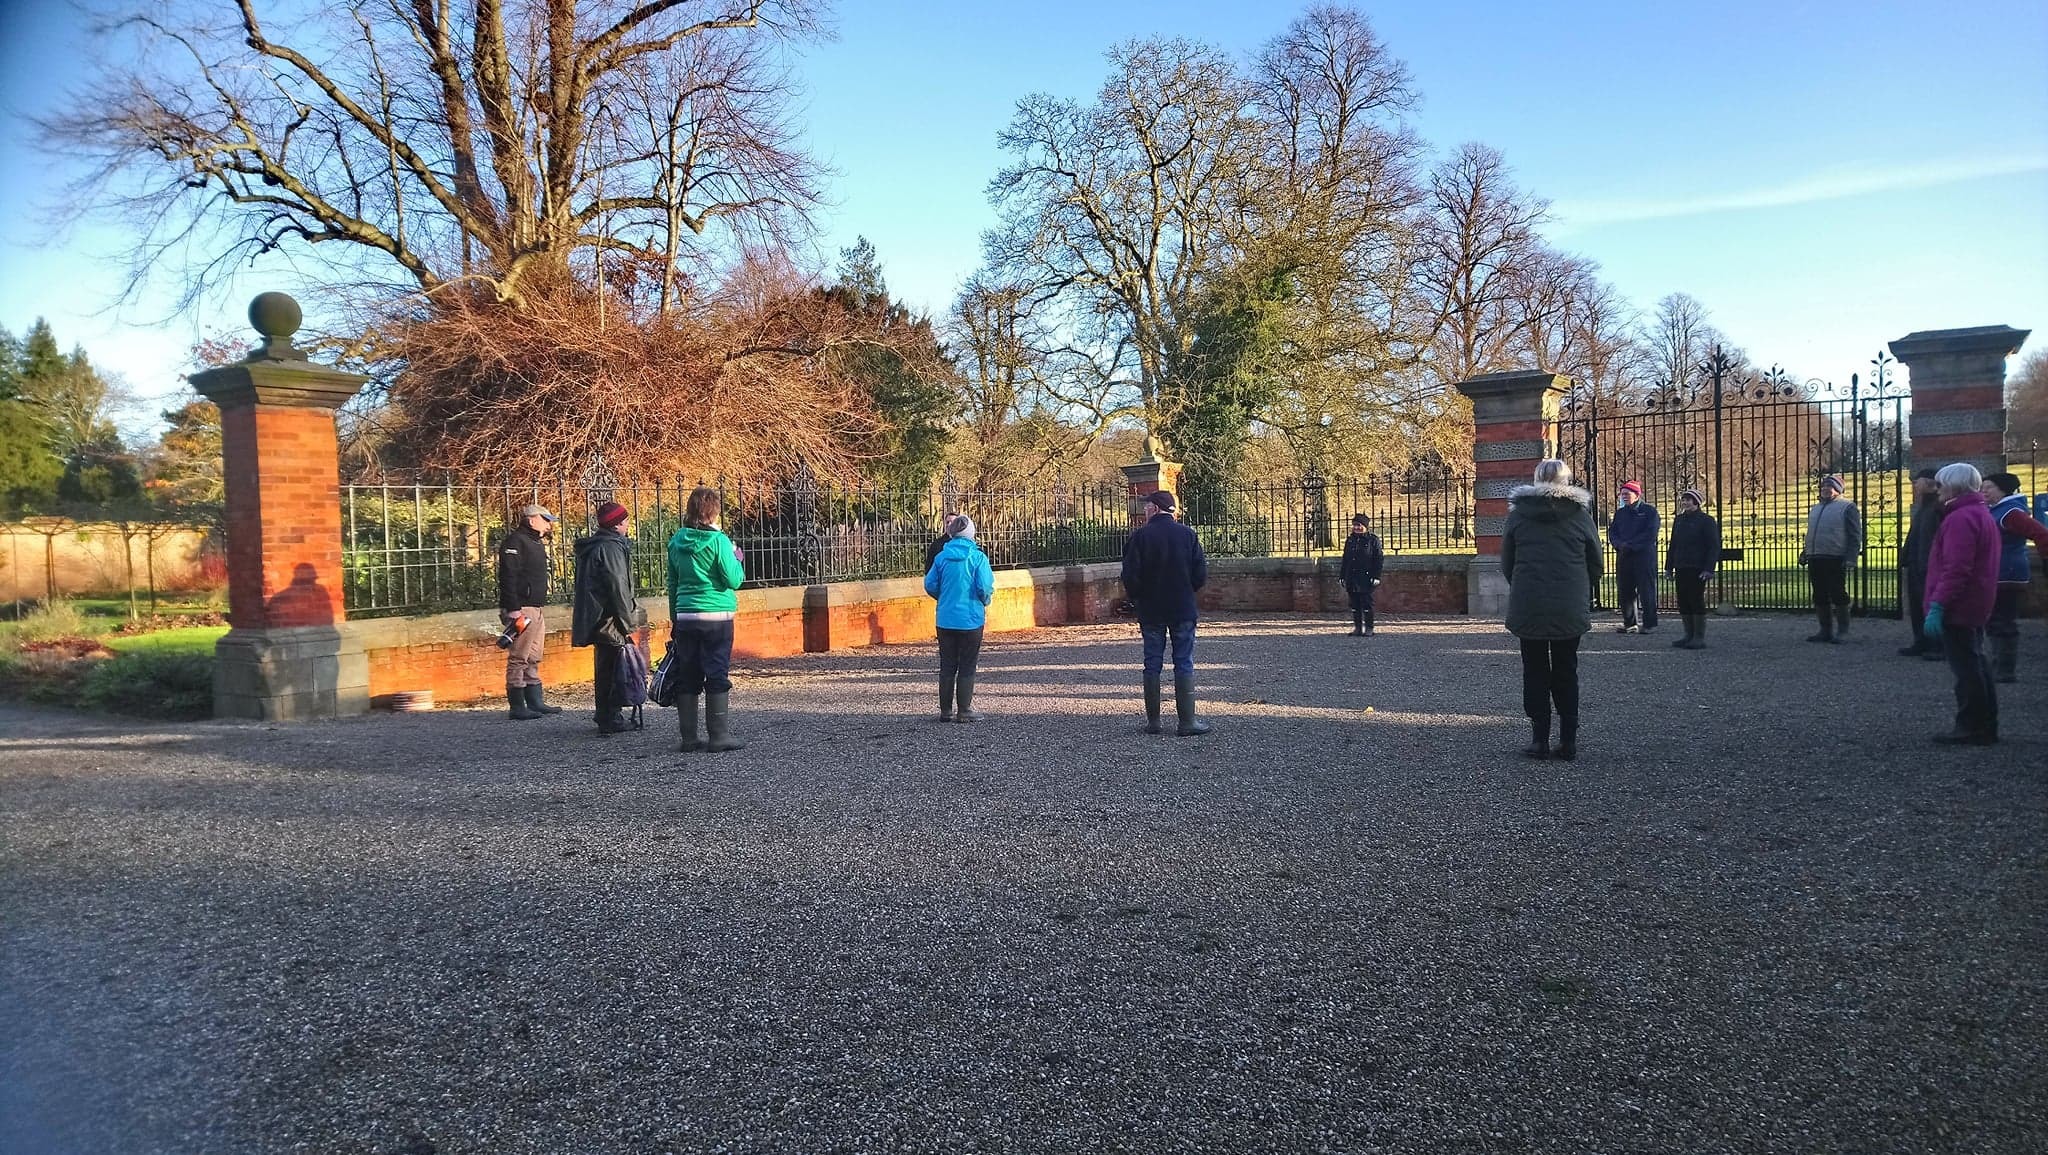 Garden volunteers have worked hard this year to maintain the large estate during lockdown, learning to work in new ways with social distancing and Covid secure procedures in place, pictured here at a morning briefing meeting